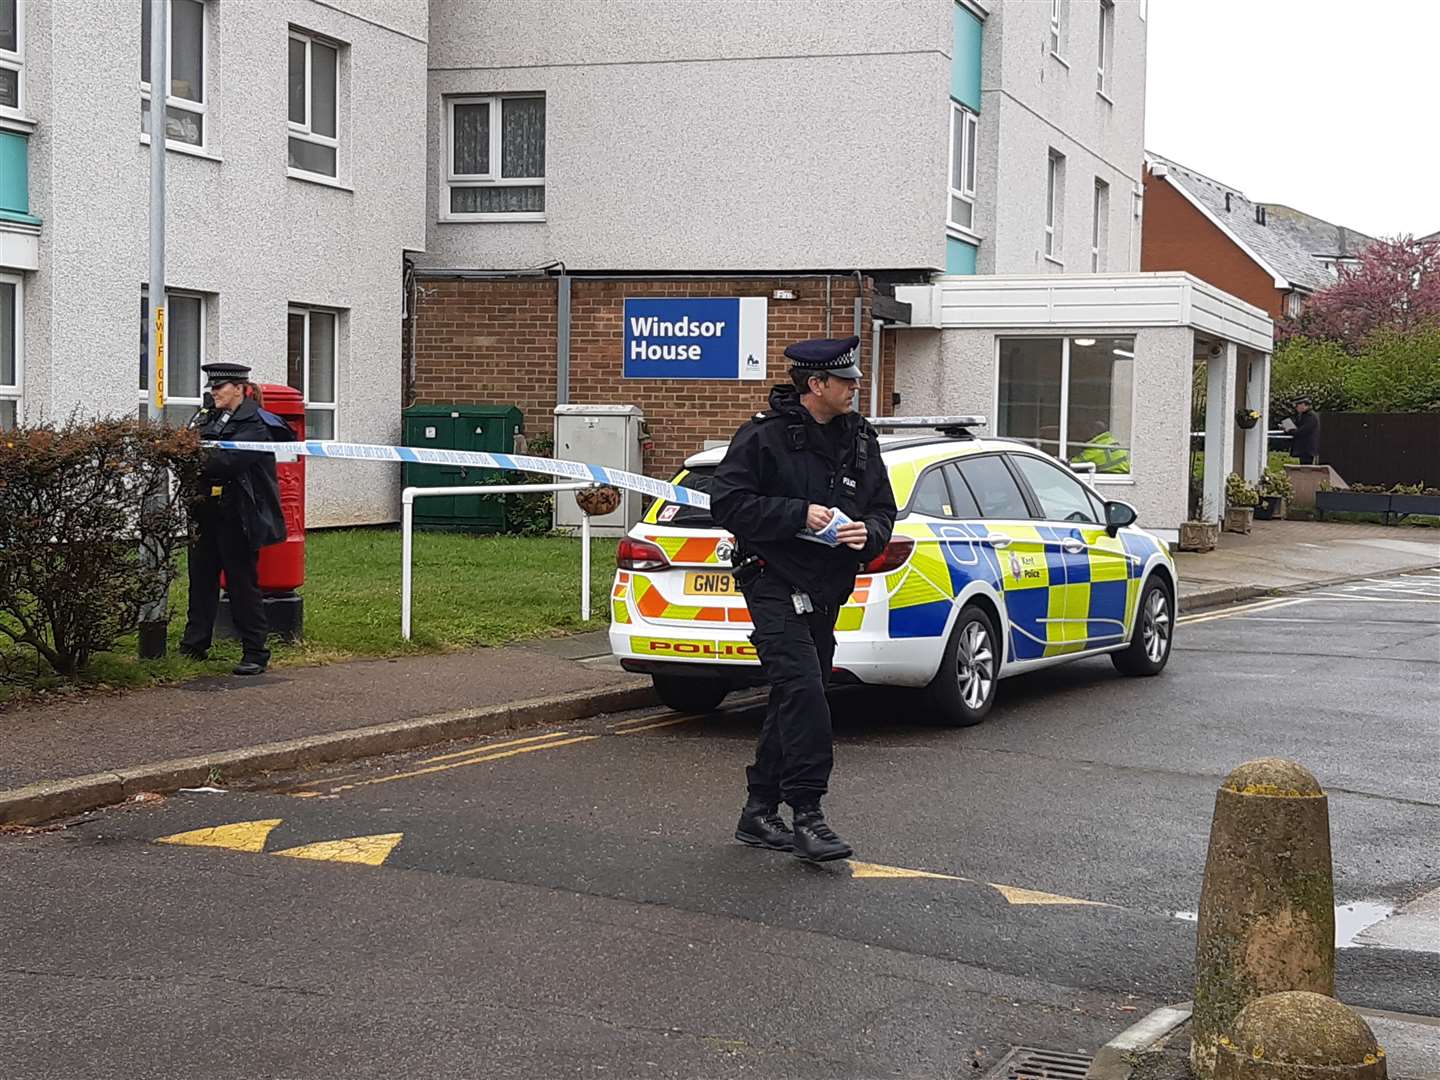 Police have taped off an area outside the tower block